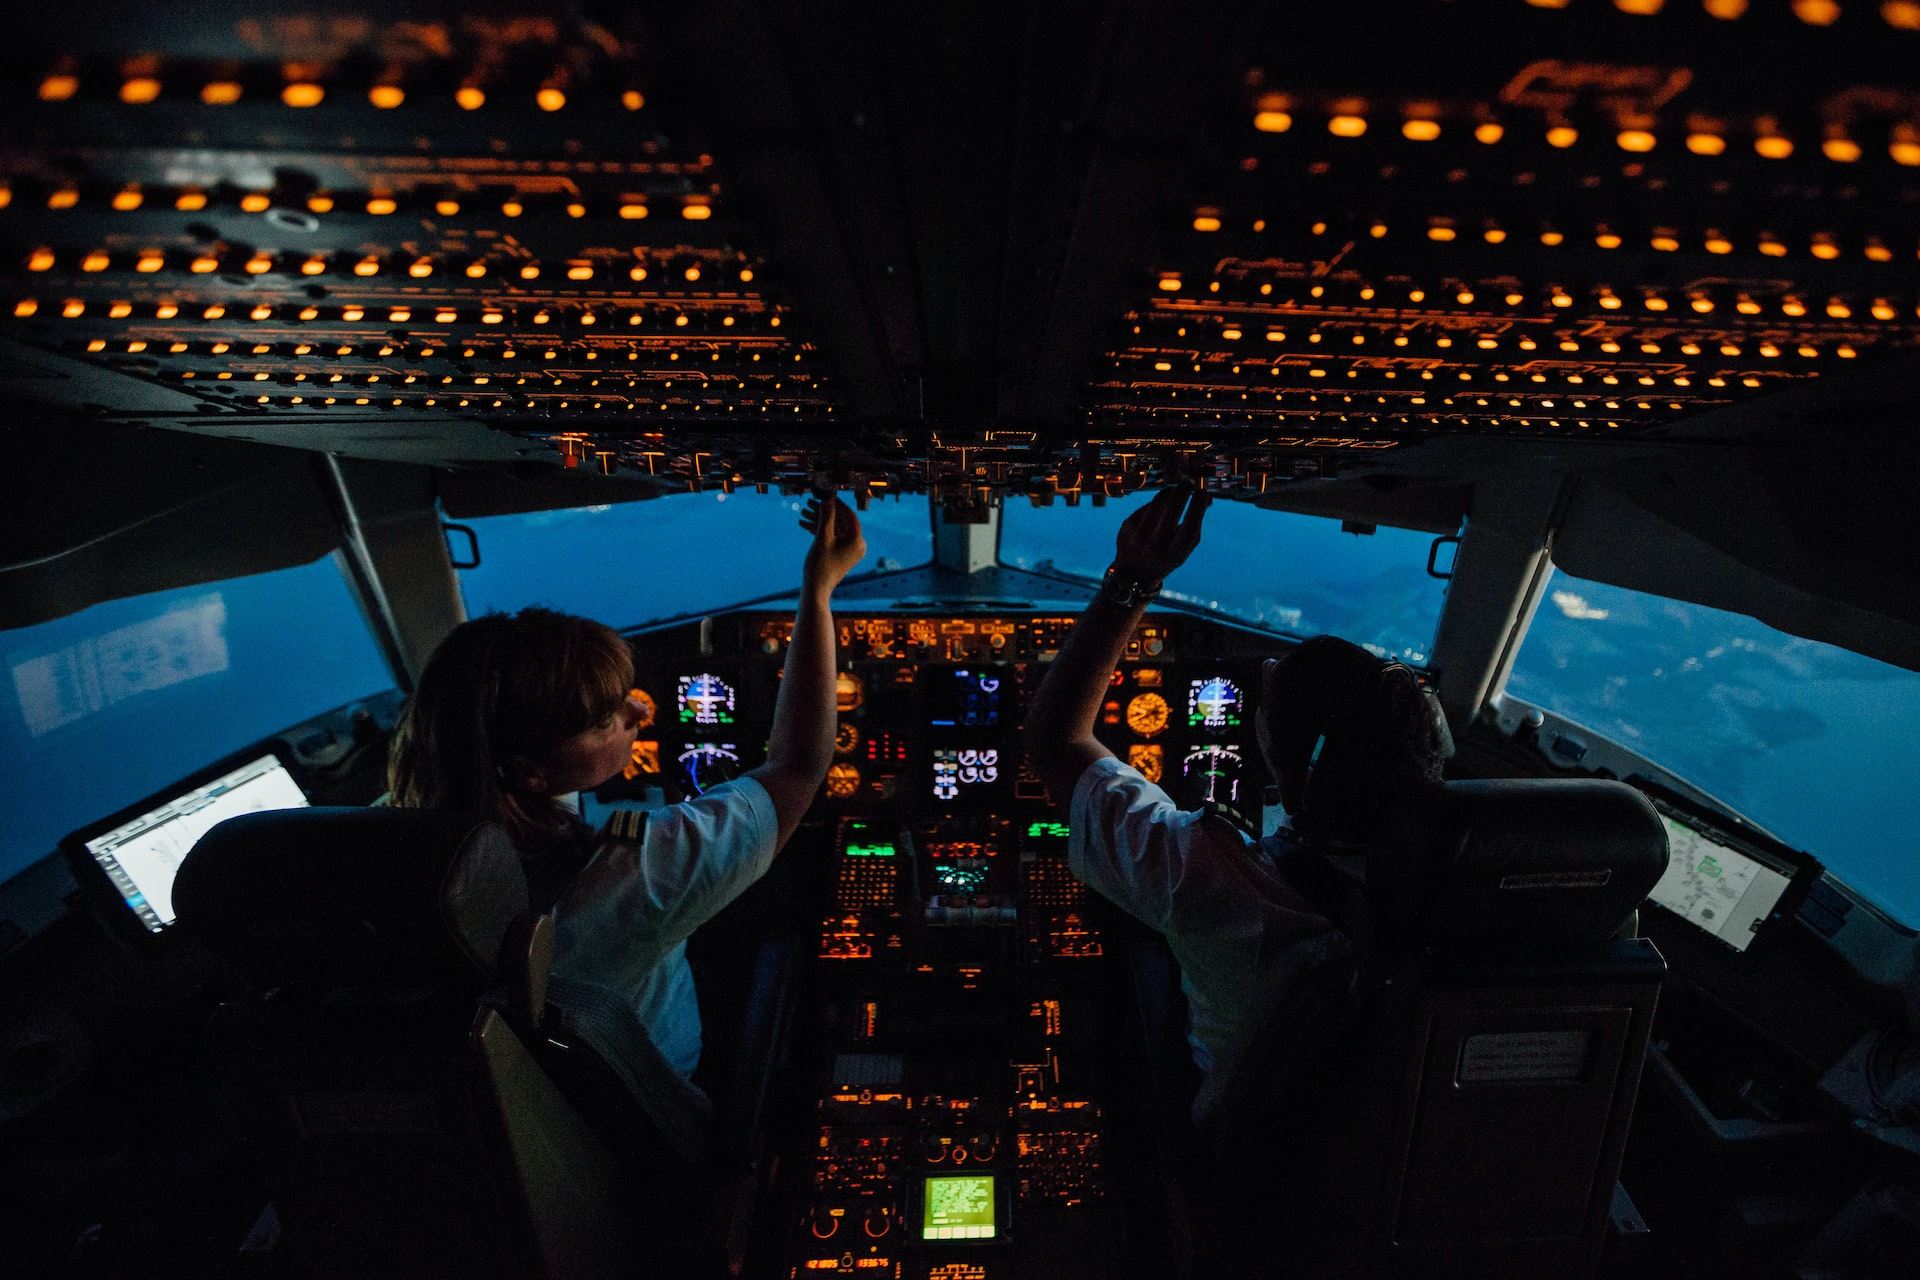 Two pilots in a cockpit agreeing on procedural decisions.